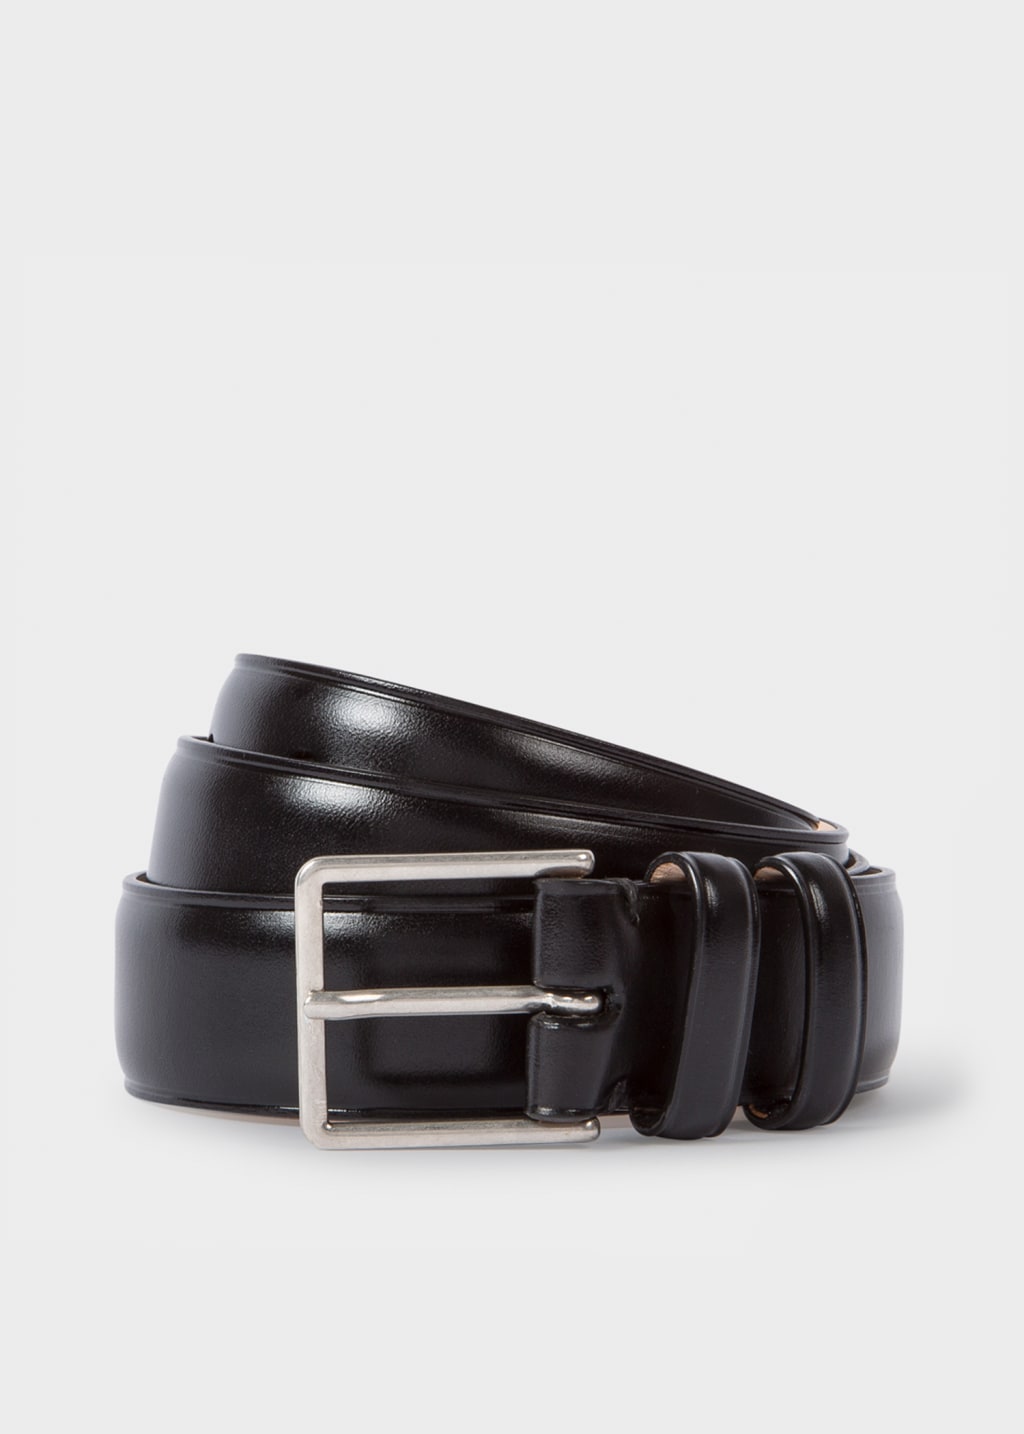 Product View - Black Leather Double Keeper Classic Suit Belt by Paul Smith